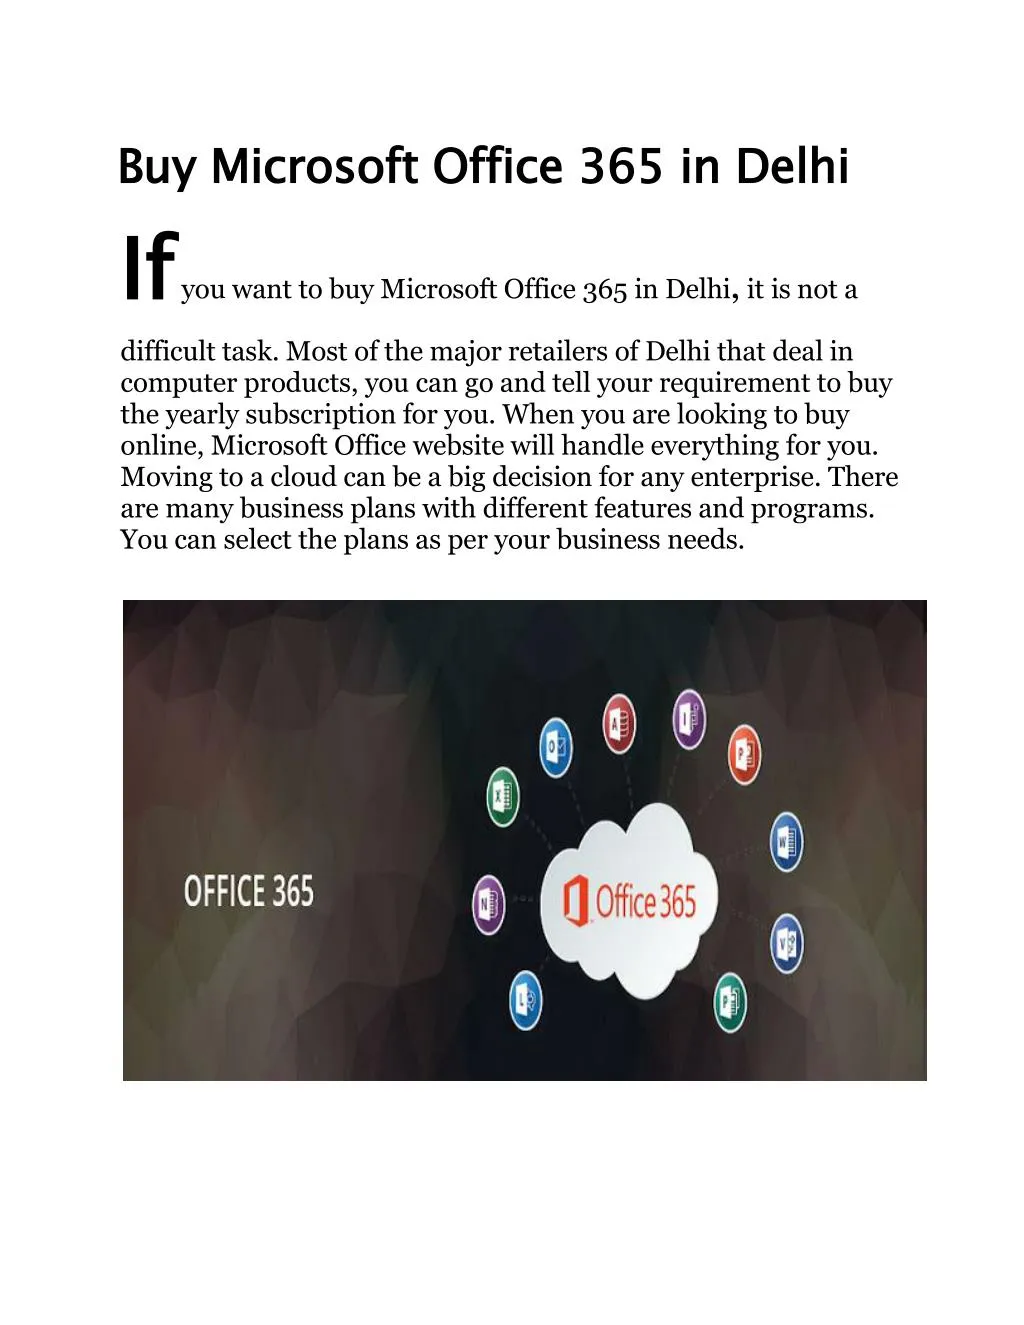 buy microsoft office 365 in if if you want